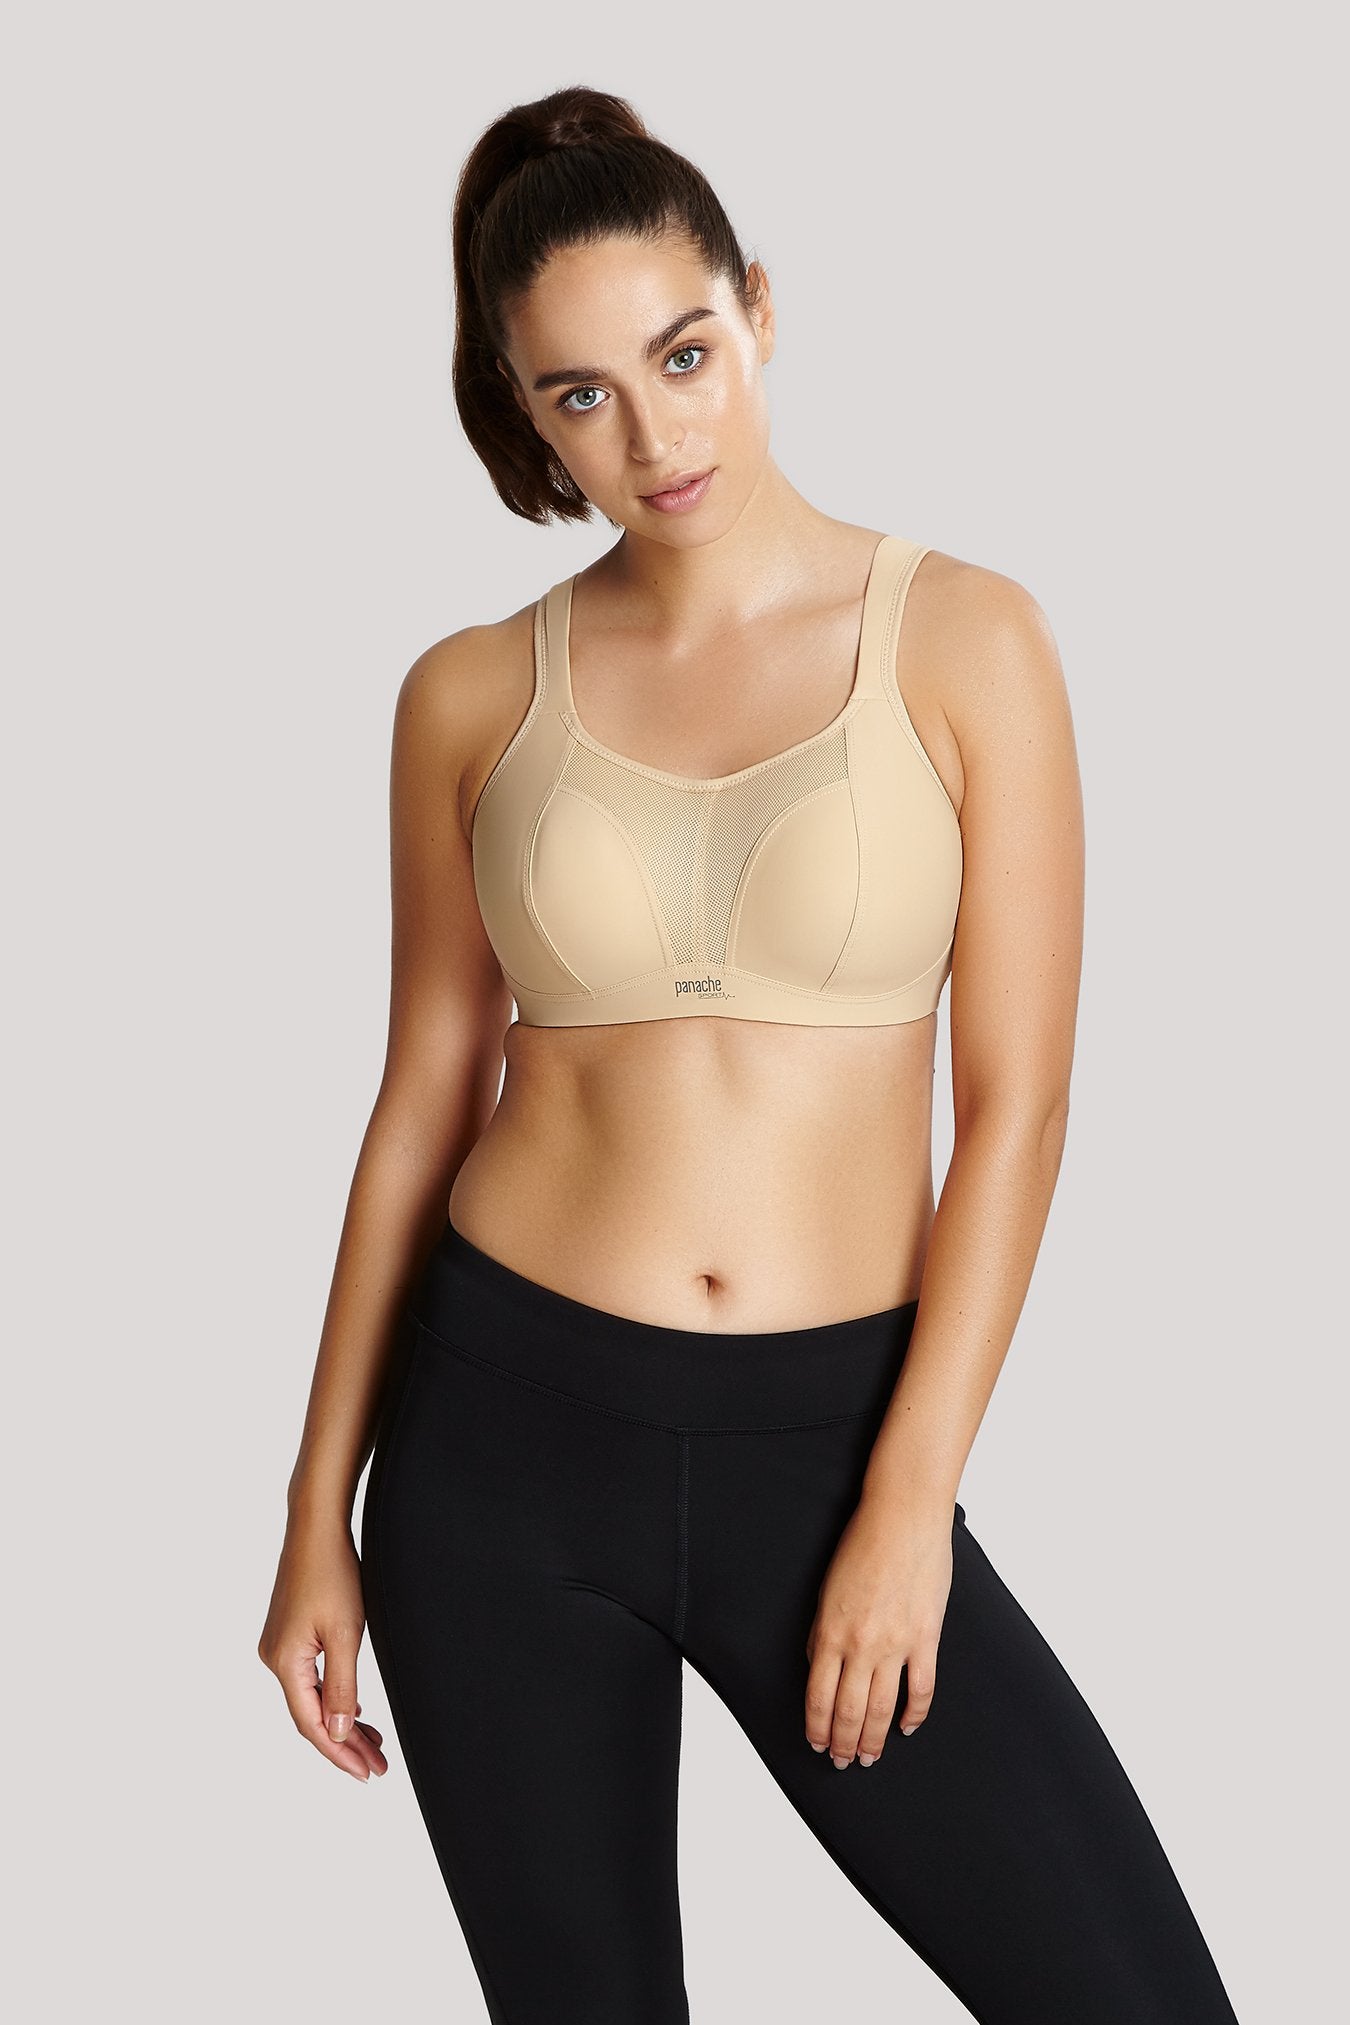 Panache Sports Wire Free - Sports Wirefree Bra  Available at Illusions Lingerie